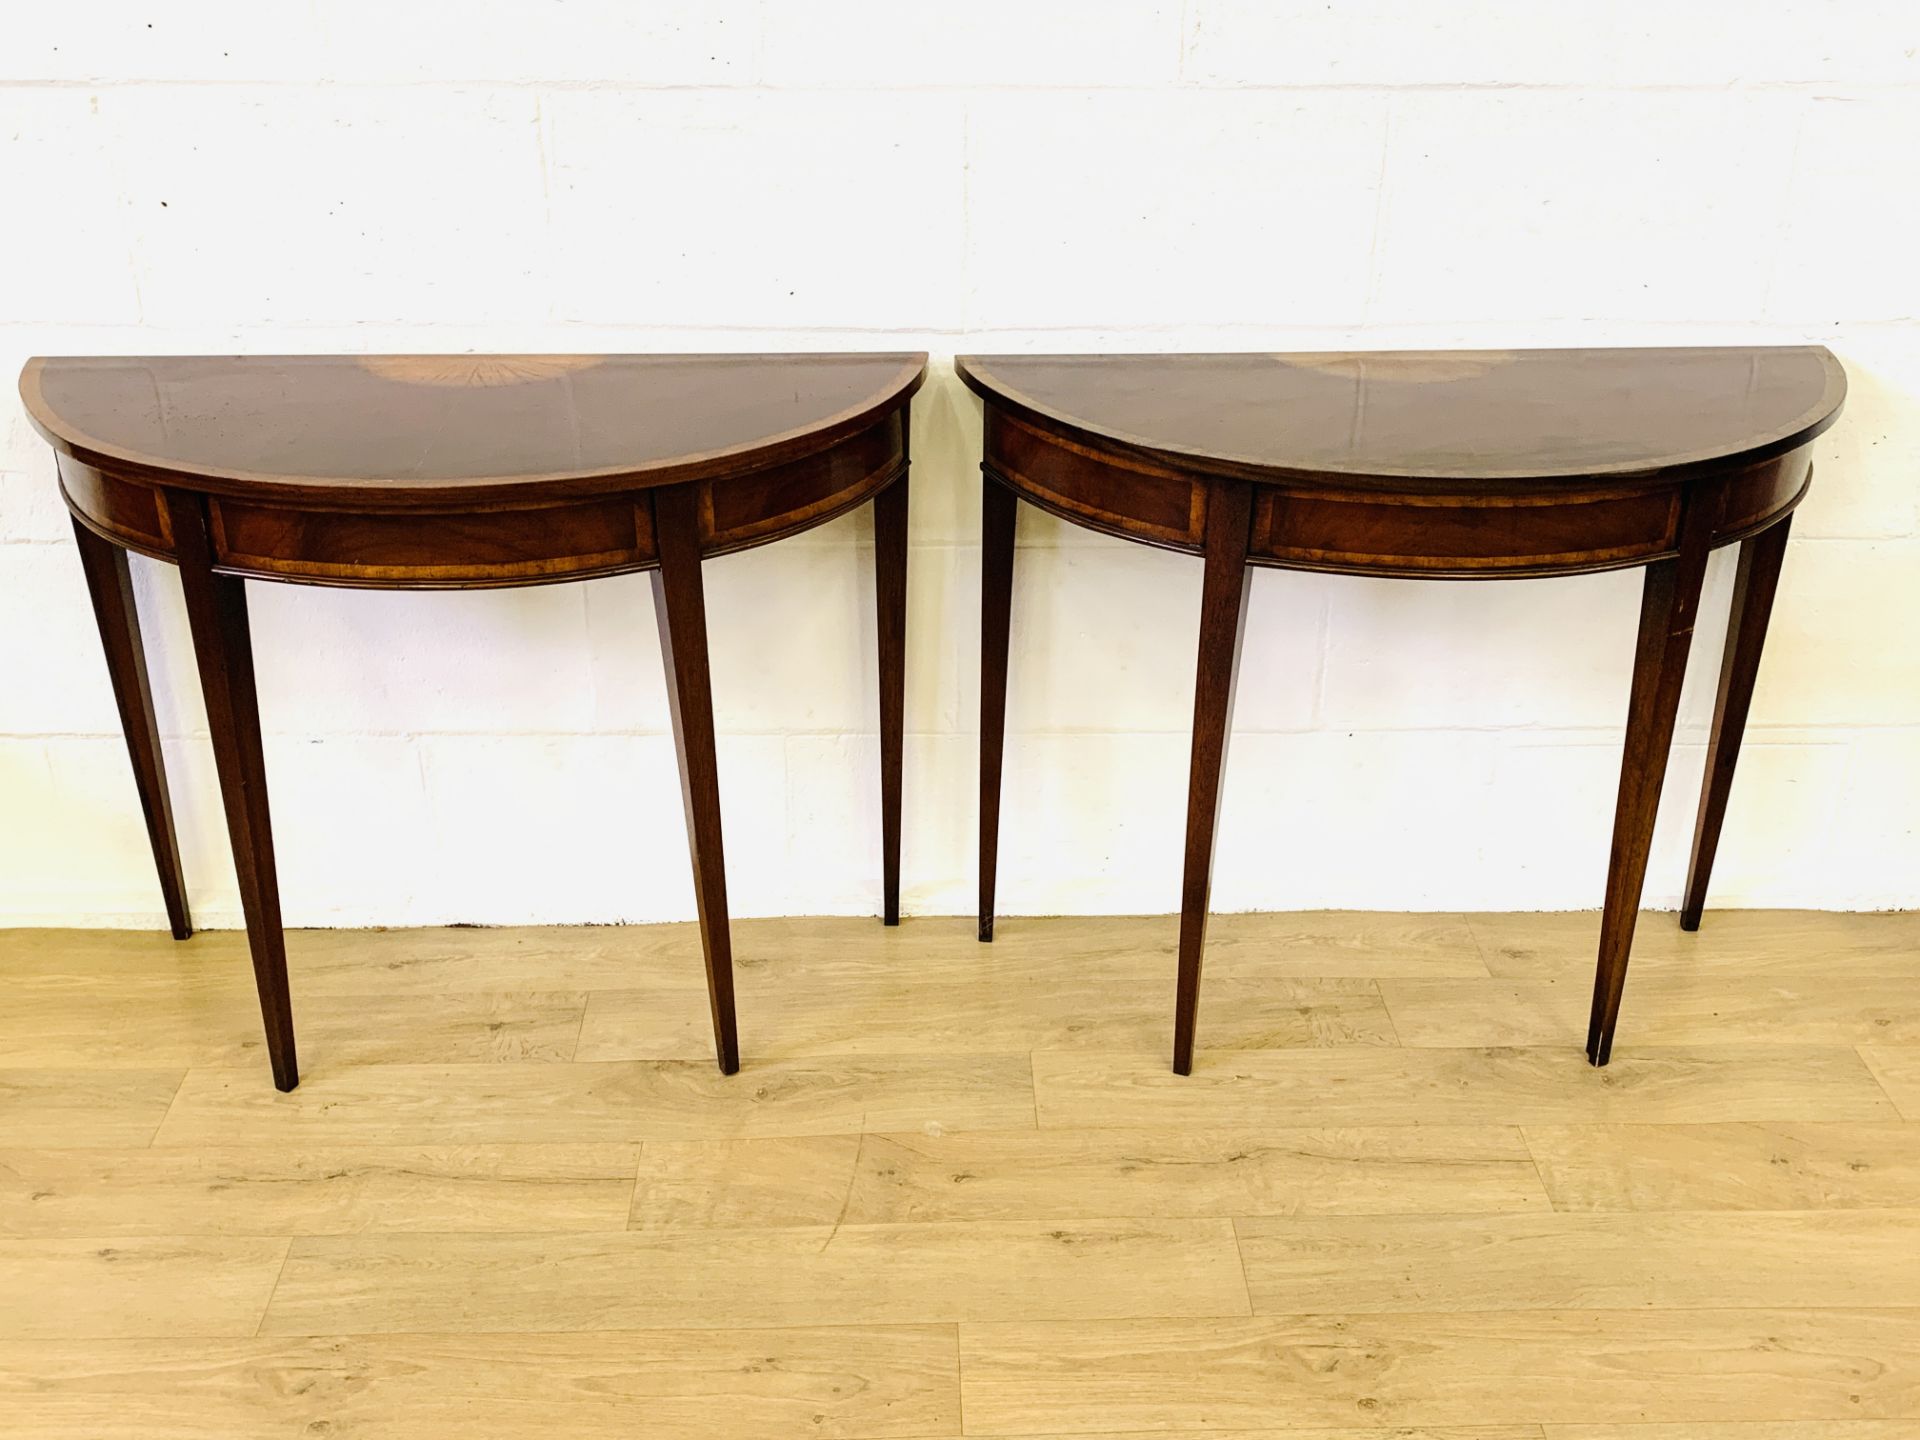 Mahogany demi-lune tables - Image 4 of 6